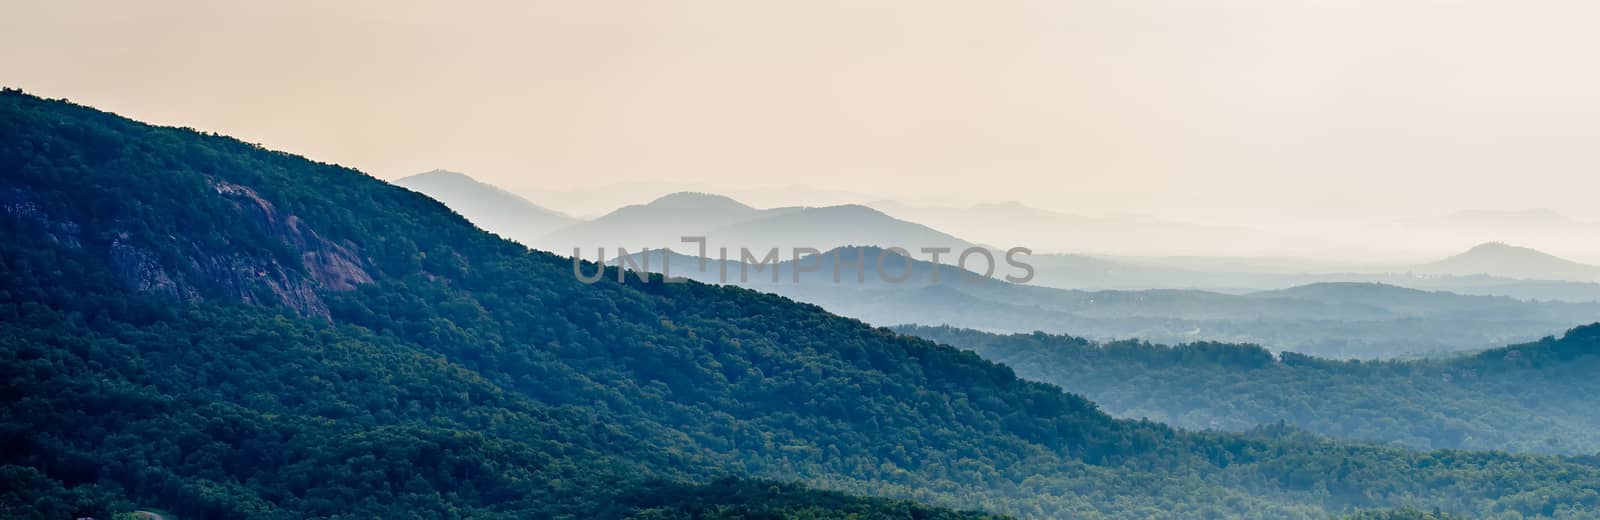 scenes near chimney rock and lake lure in blue ridge mountains n by digidreamgrafix